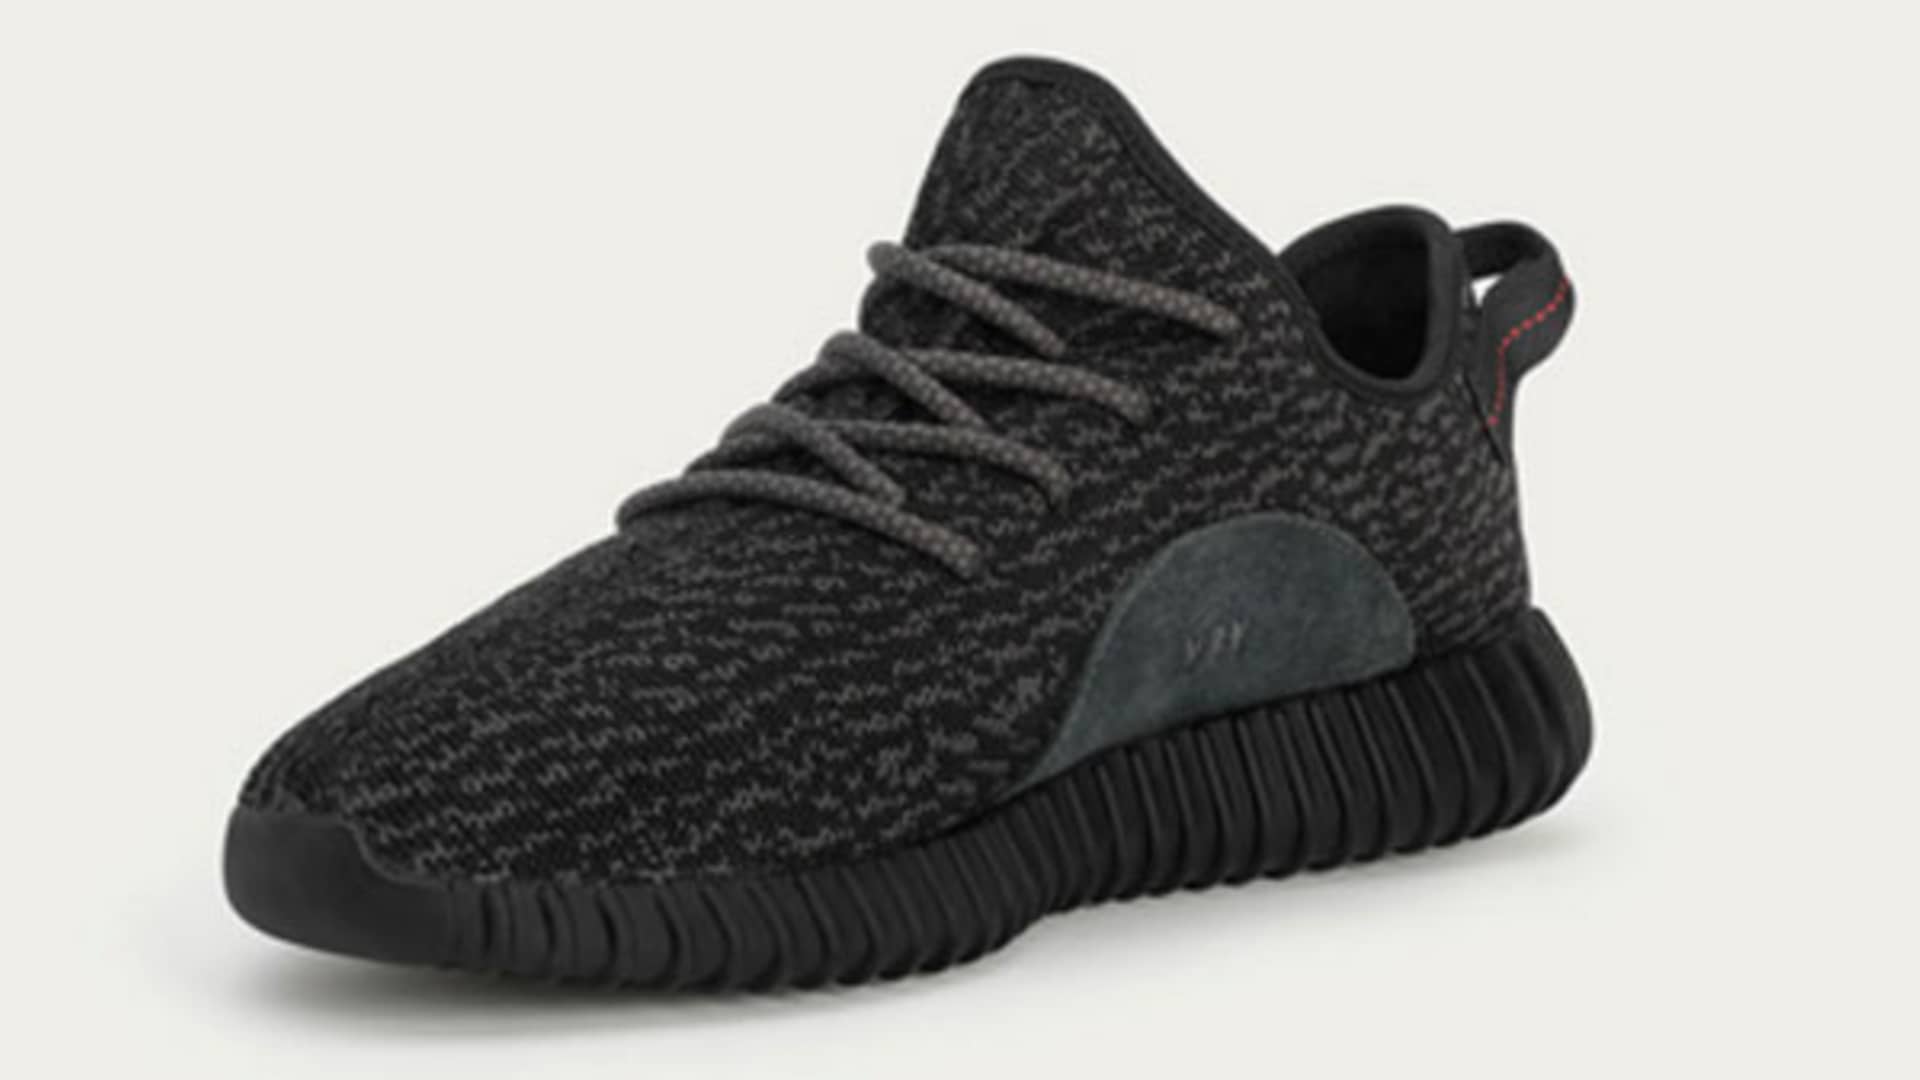 Misforstå evne Fremskynde Too late, Yeezy Boost 350s are sold out in the US